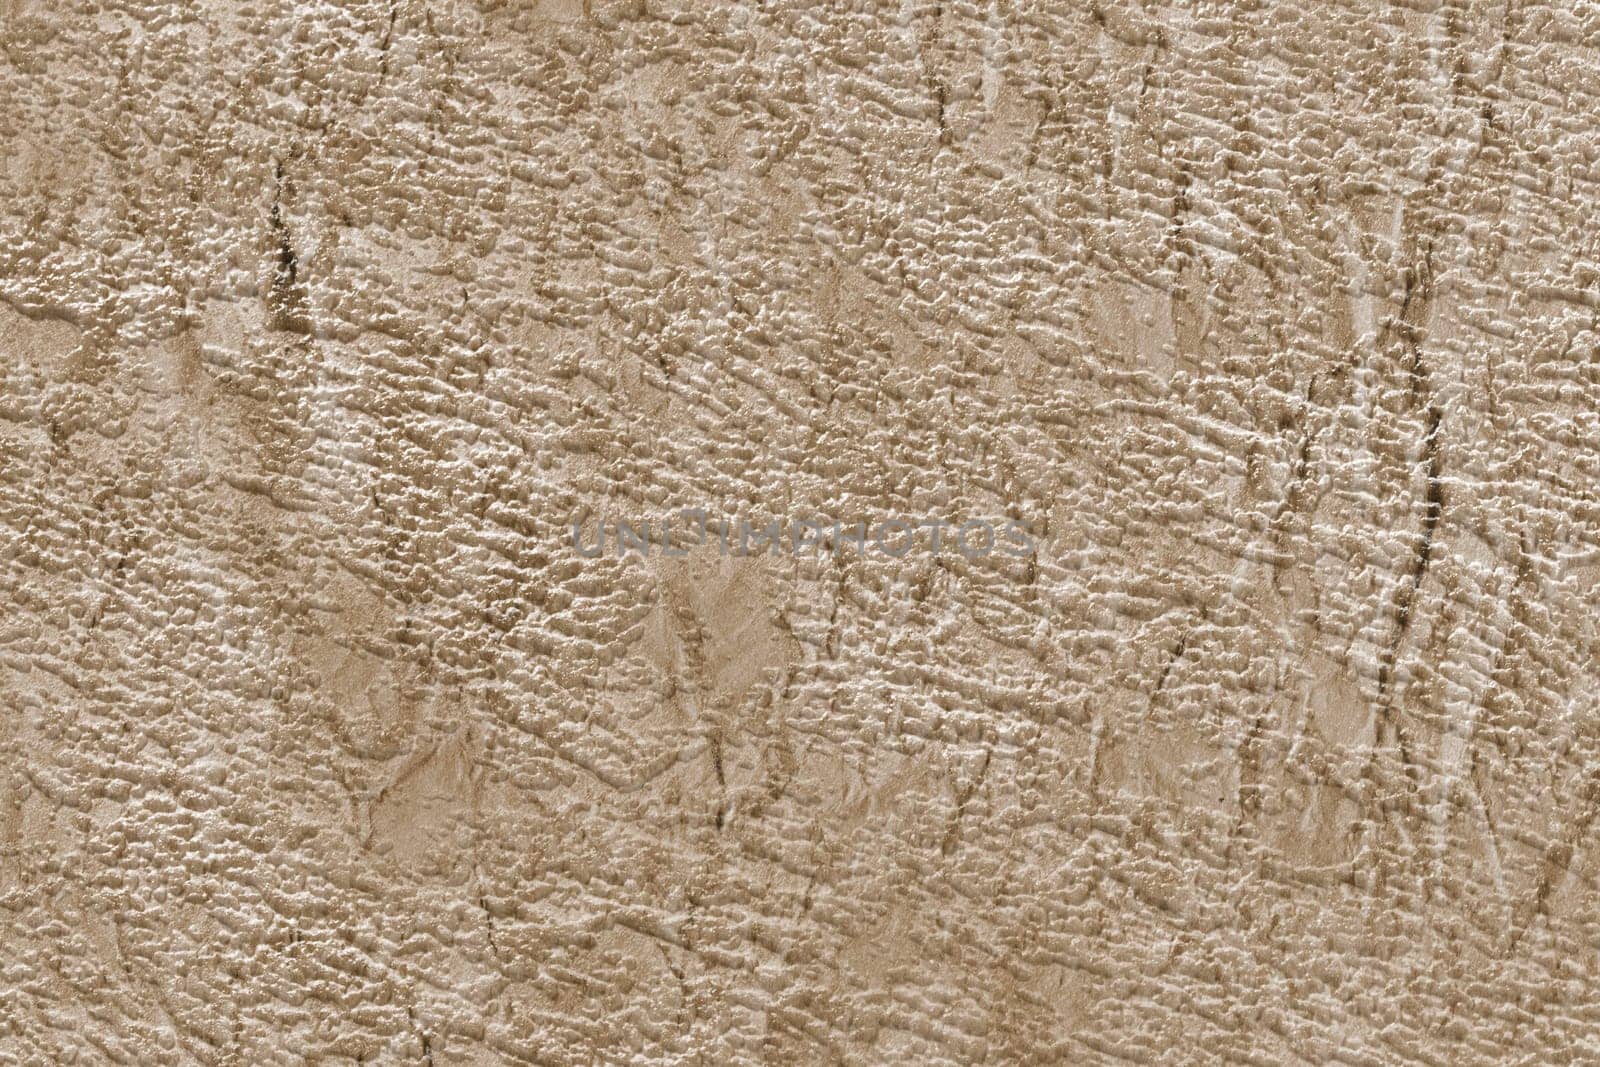 Paper textured background in beige color with scuffs and scratches. Expensive Venetian plaster.